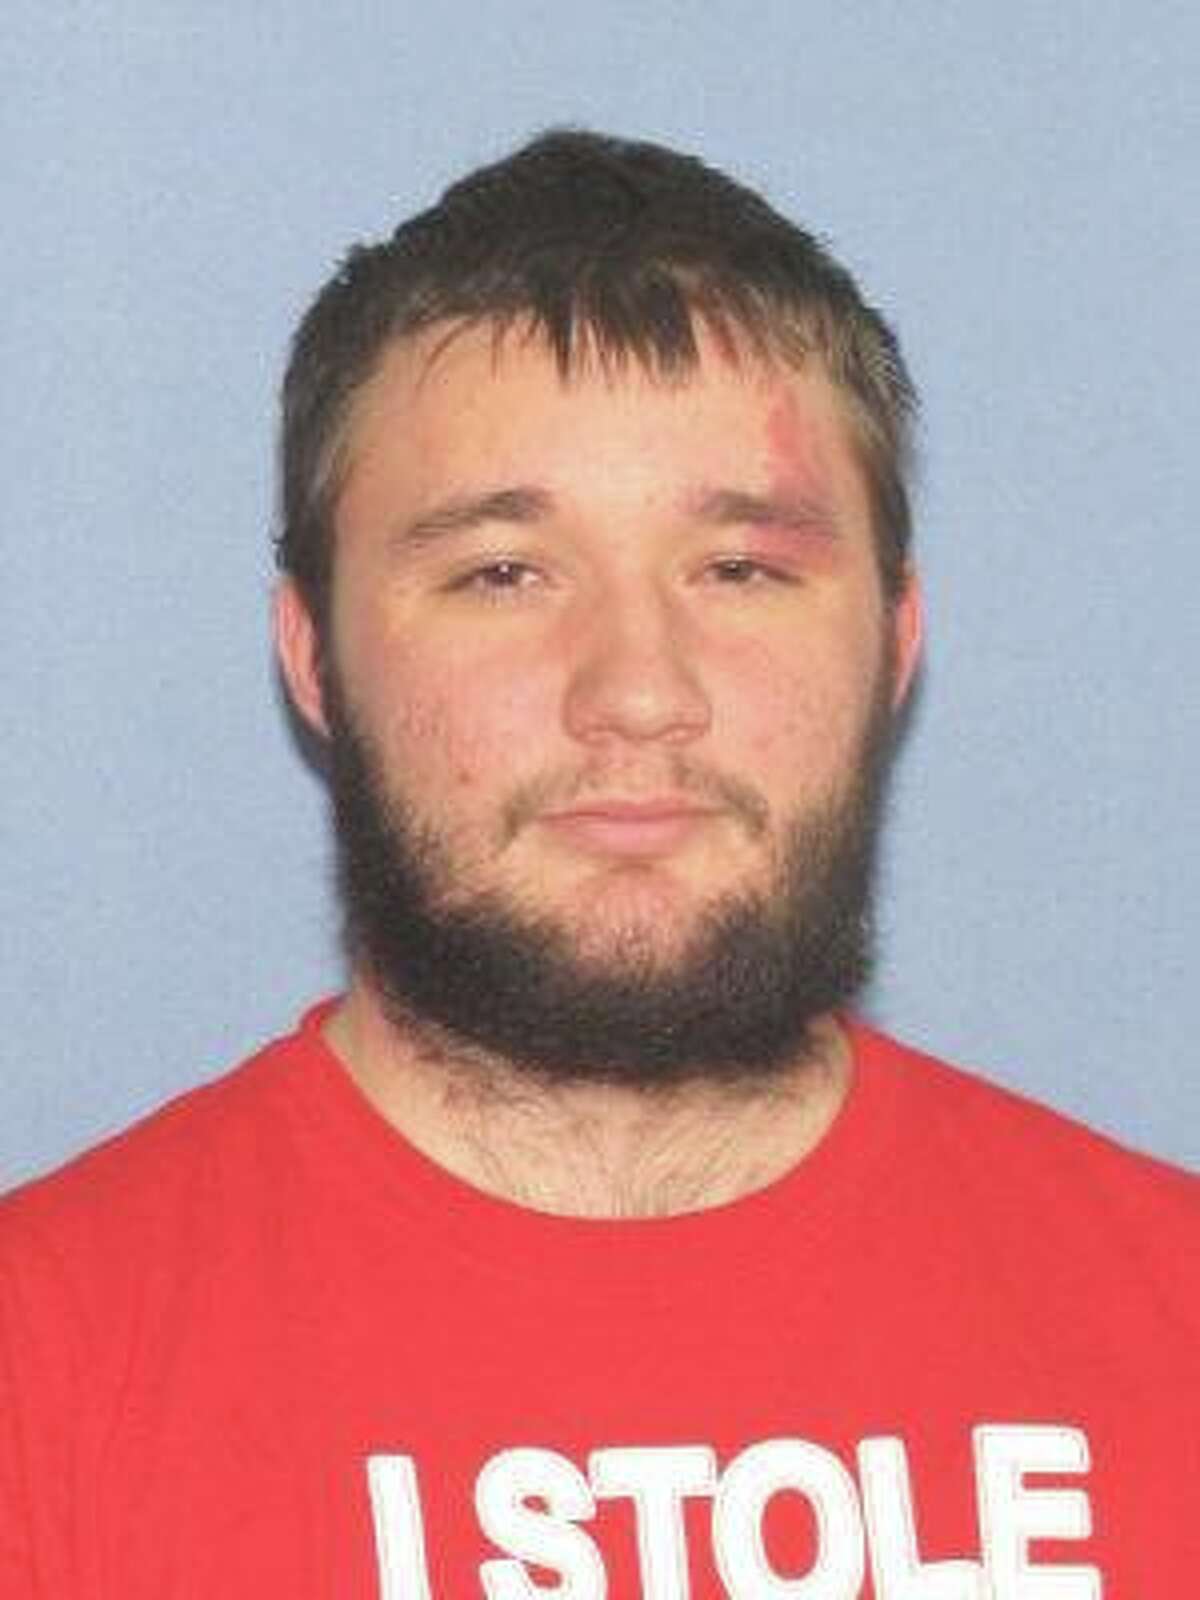 Andrew Brian Akers, 20, may be in the company of Clemmer.